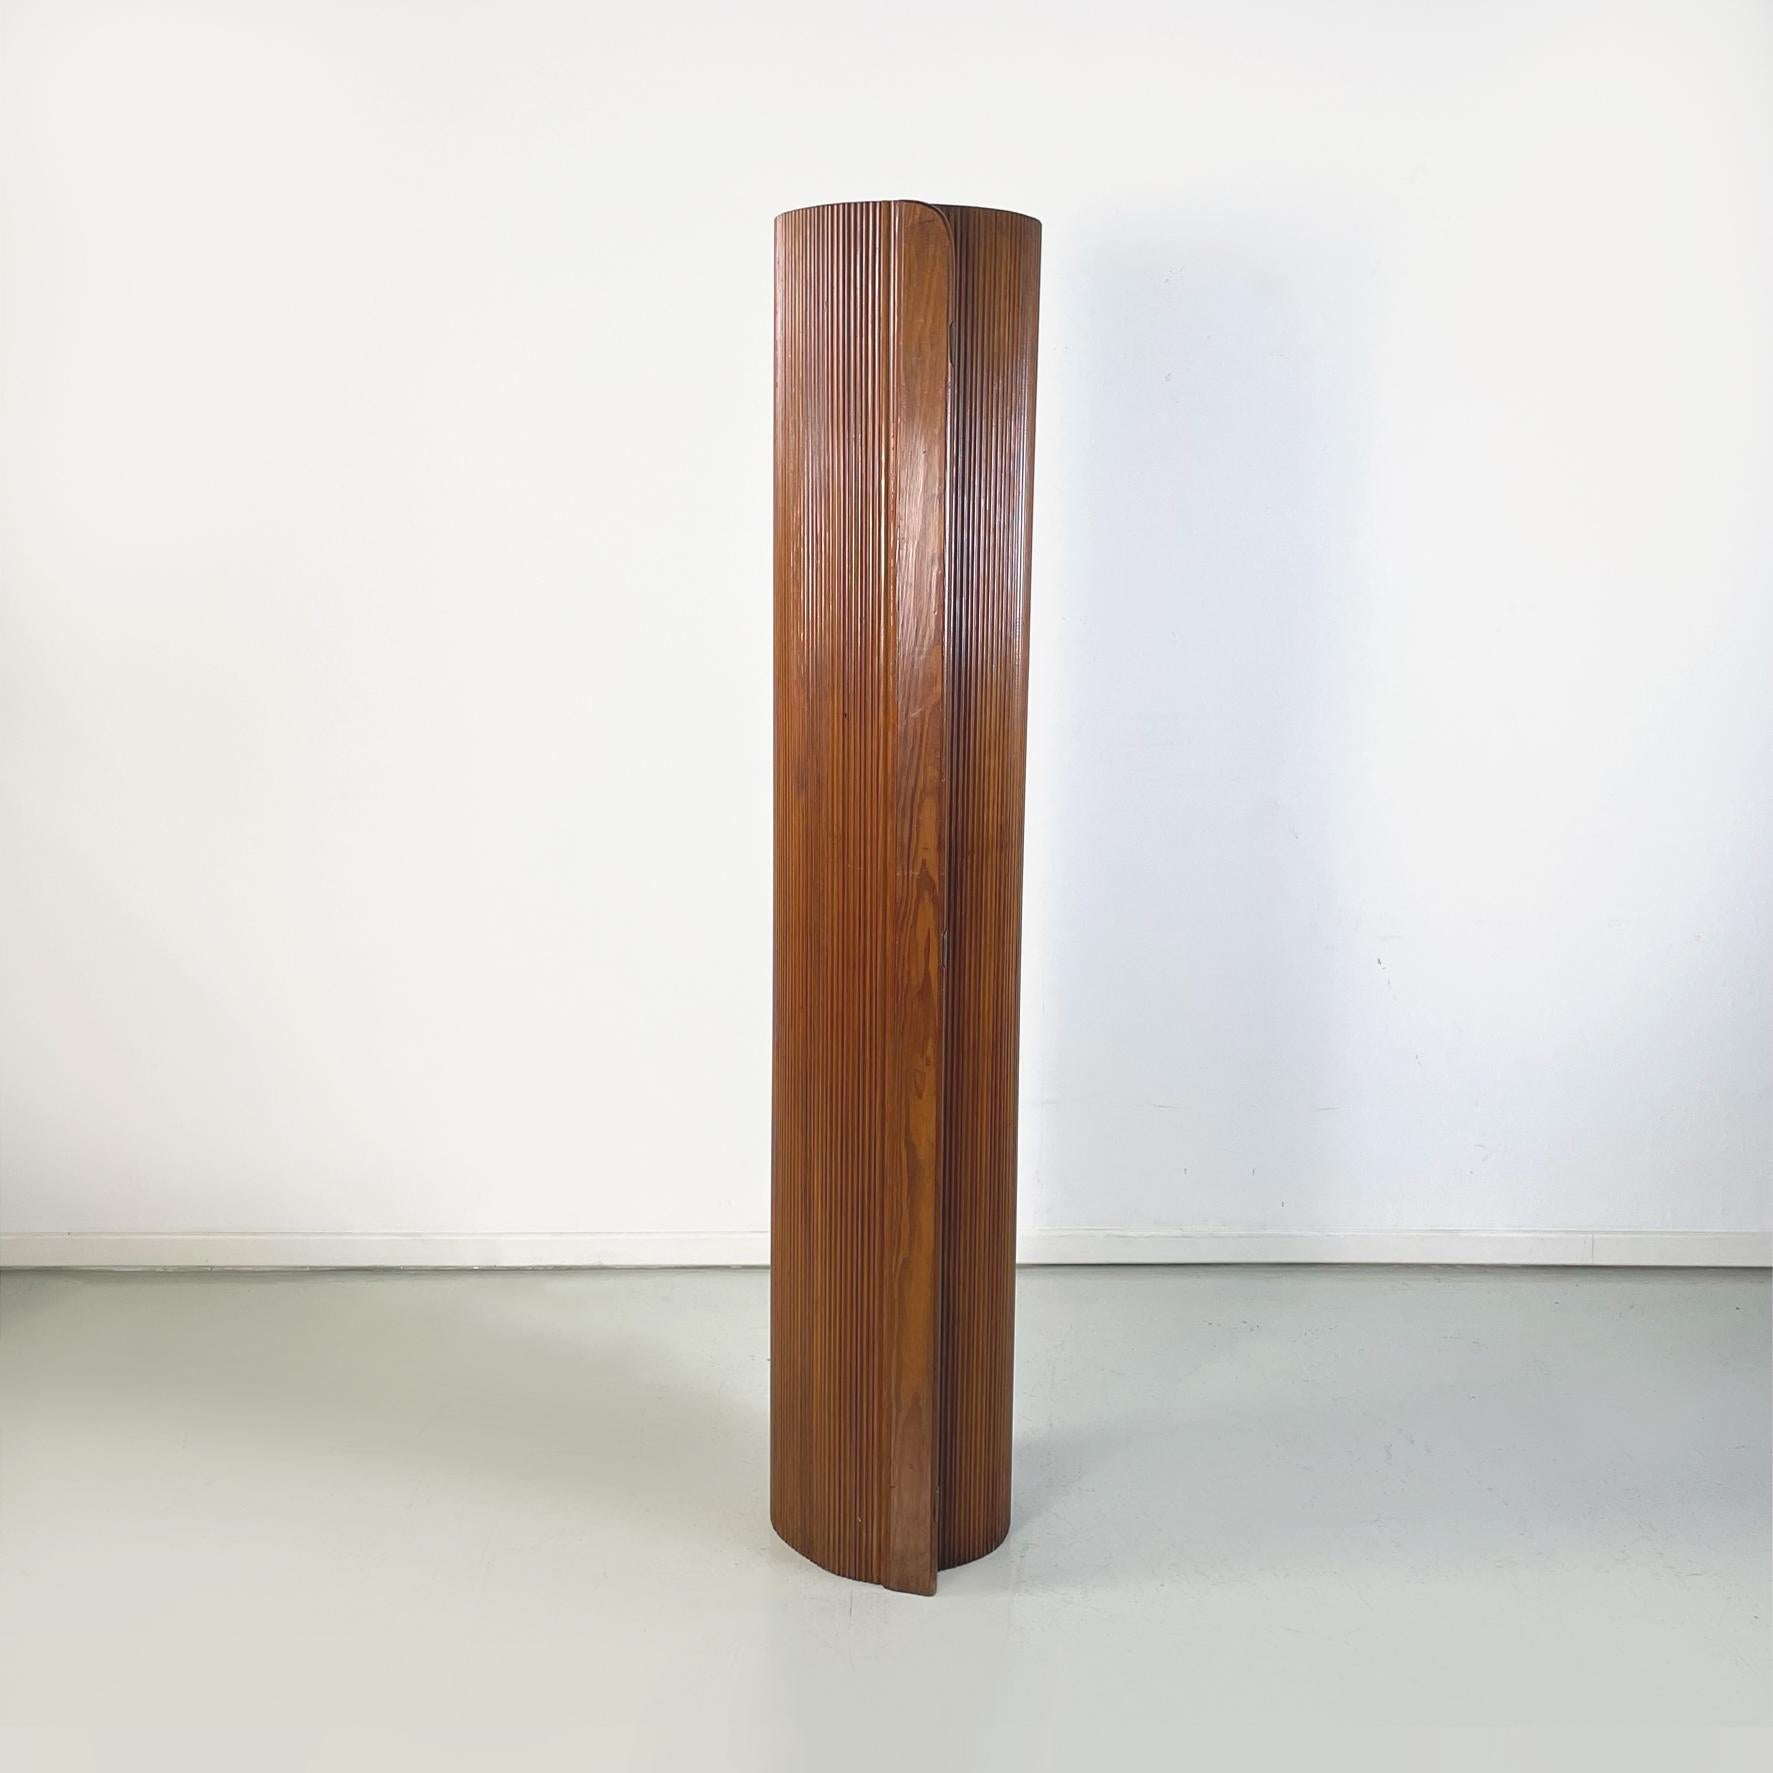 Mid-20th Century French Midcentury Art Deco Self-Supporting Wooden Screen by Baumann, 1950s For Sale